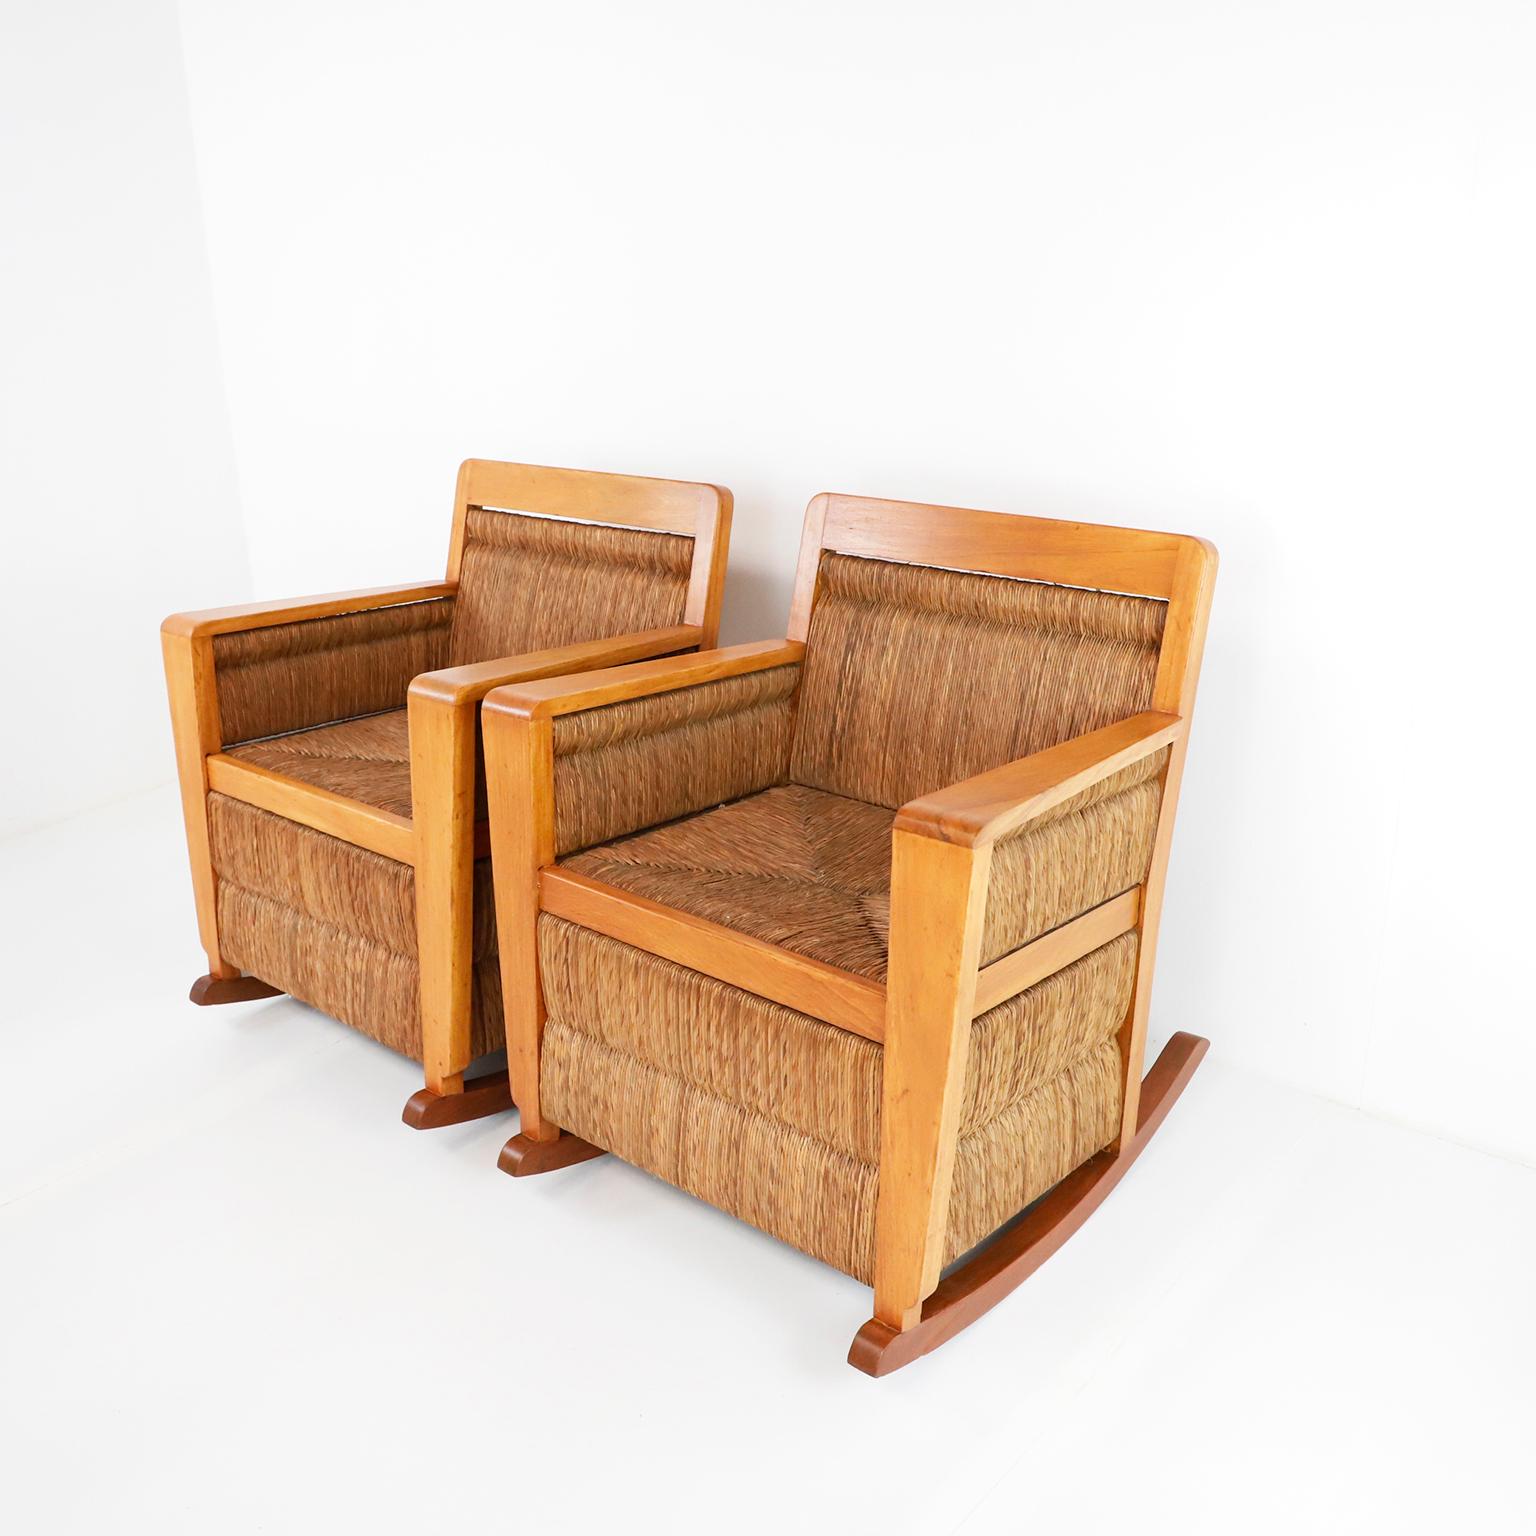 Pair of Mexican Mid-Century Modern woven Rockingchairs made in the 1950s in Primavera wood and palm cords. Featuring simple but elegant modern frames , this rockingchair provides a surprising amount of comfort with its beautifully woven seat. The